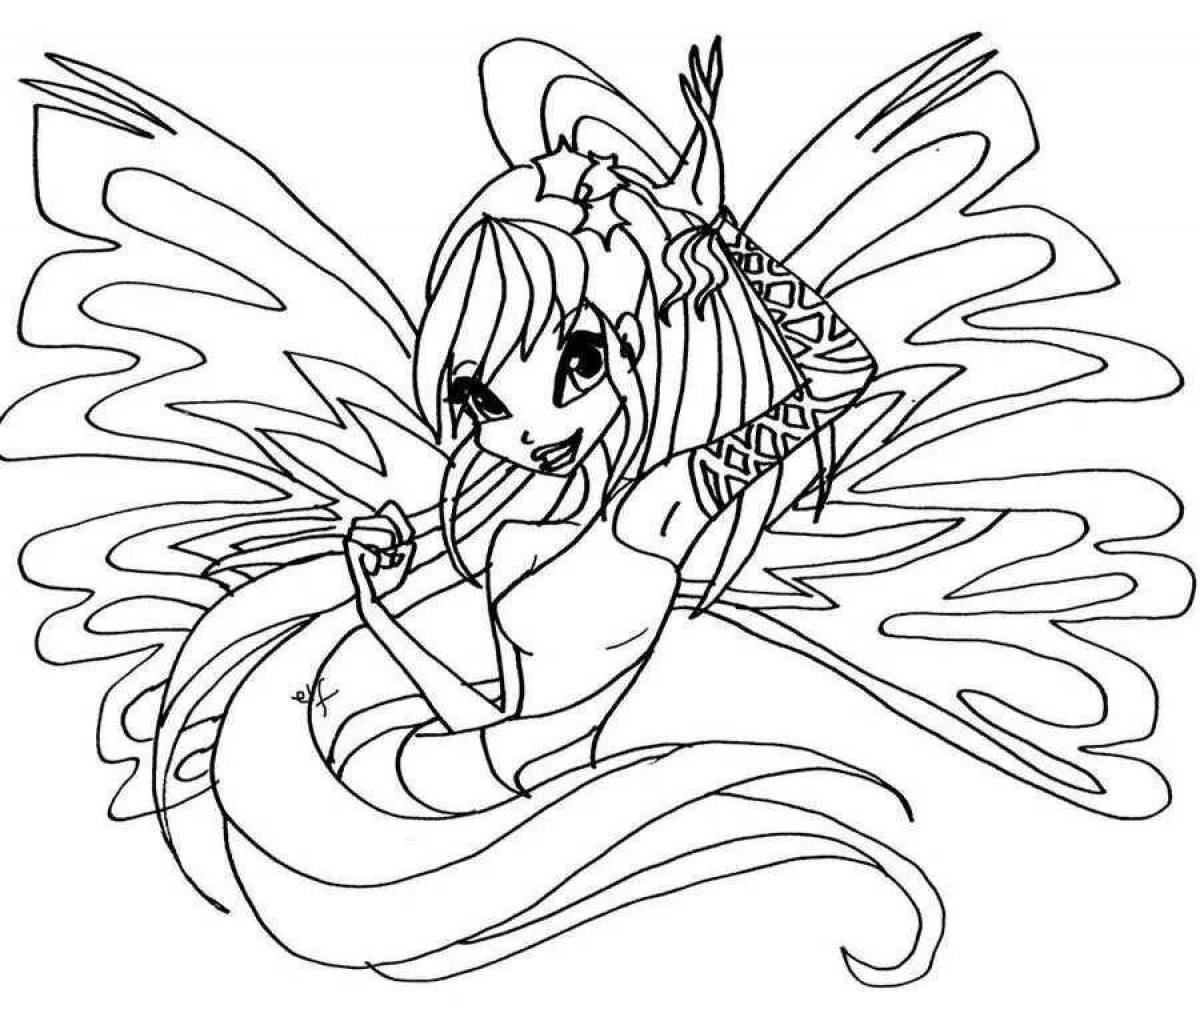 Charming winx fairy coloring book